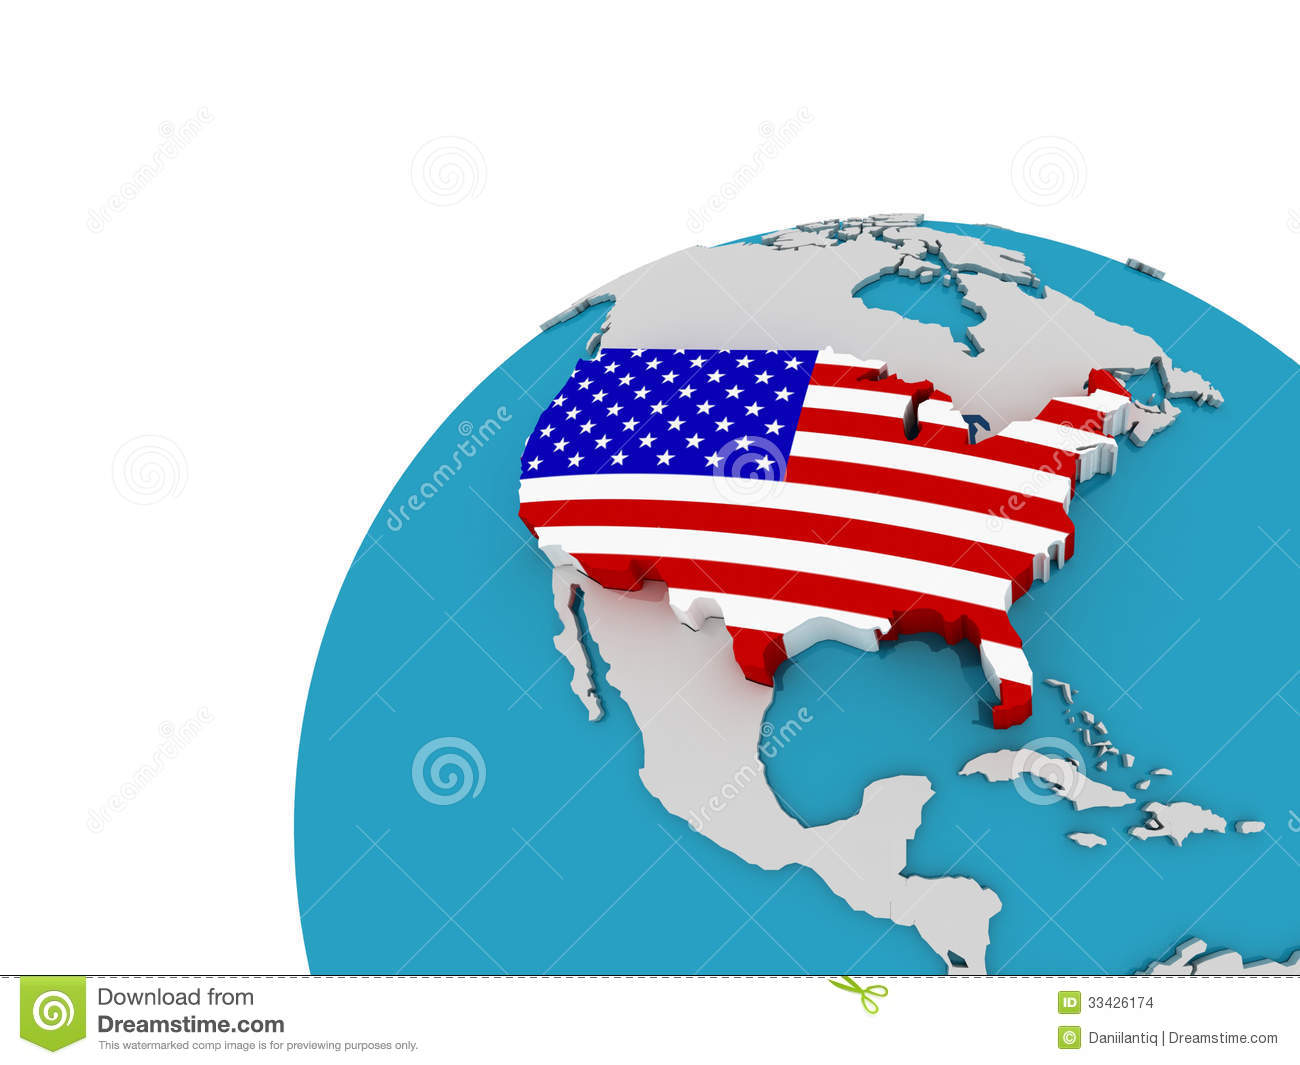 The Flag Of United States On The Globe 3d Stock Images   Image